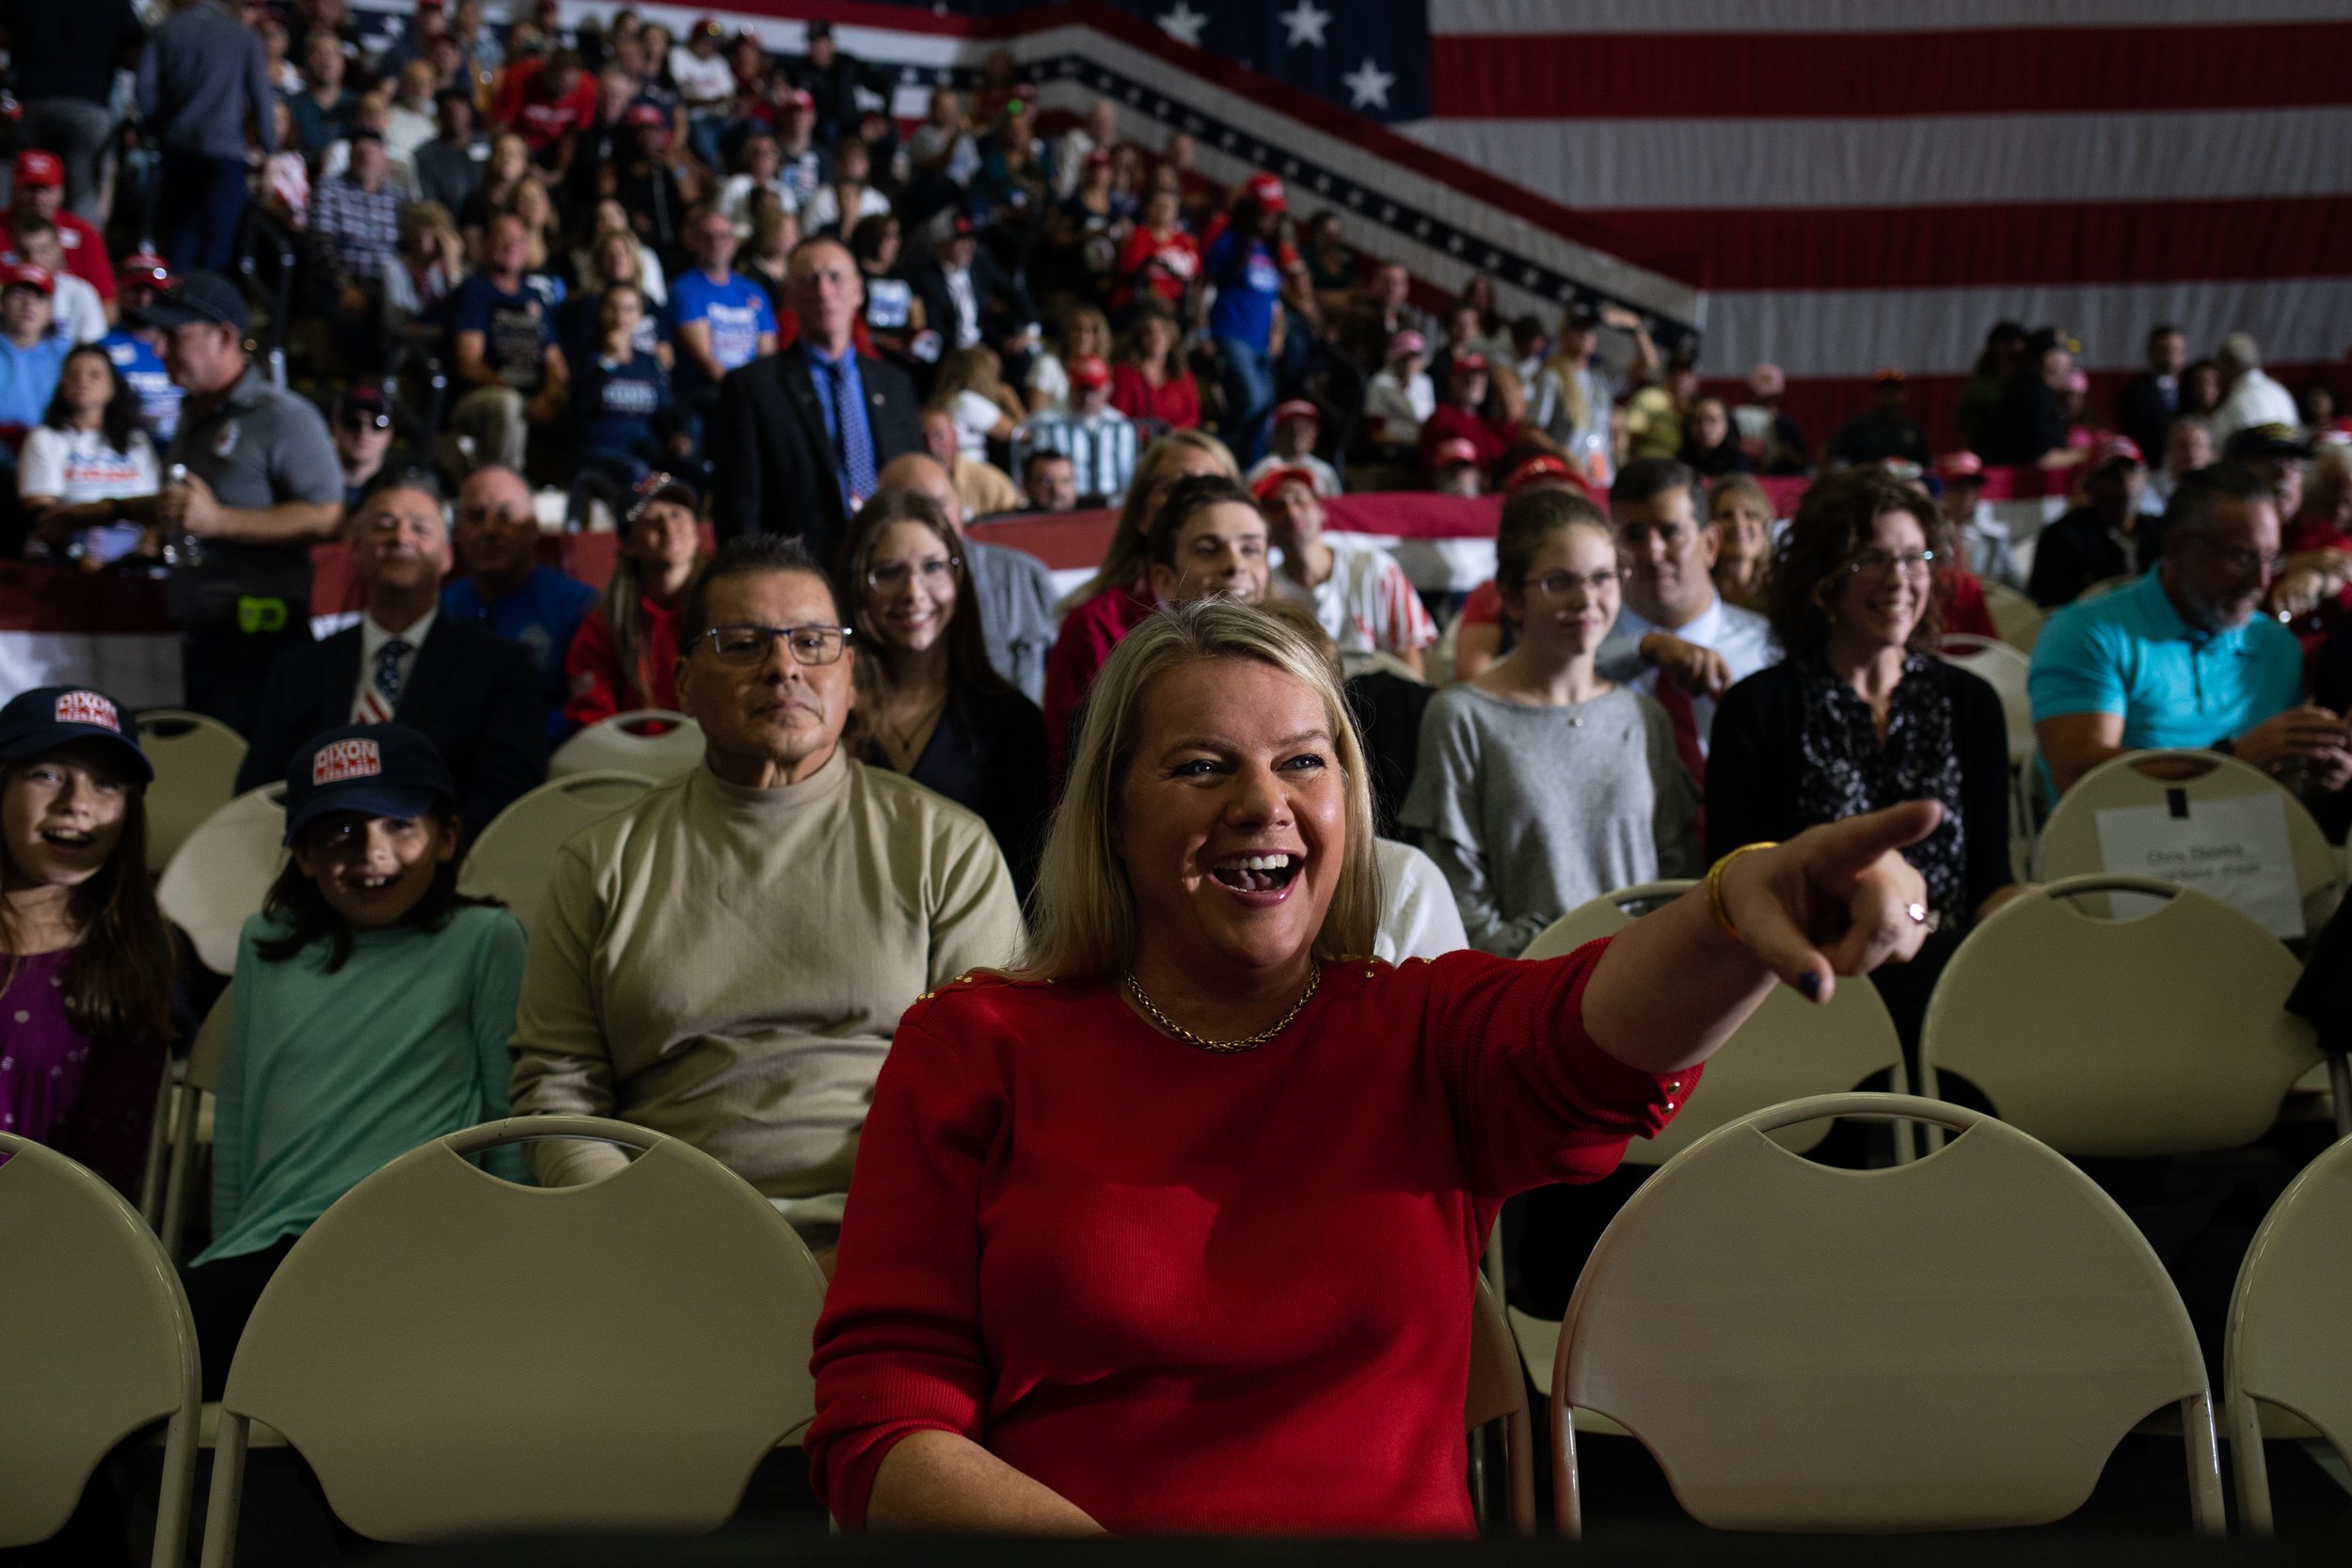  WARREN, MI - OCTOBER 01: Co-Chair of the Michigan Republican Party Meshawn Maddock waves to an attendee during a Save America rally on October 1, 2022 in Warren, Michigan. Trump has endorsed Republican gubernatorial candidate Tudor Dixon, Secretary 